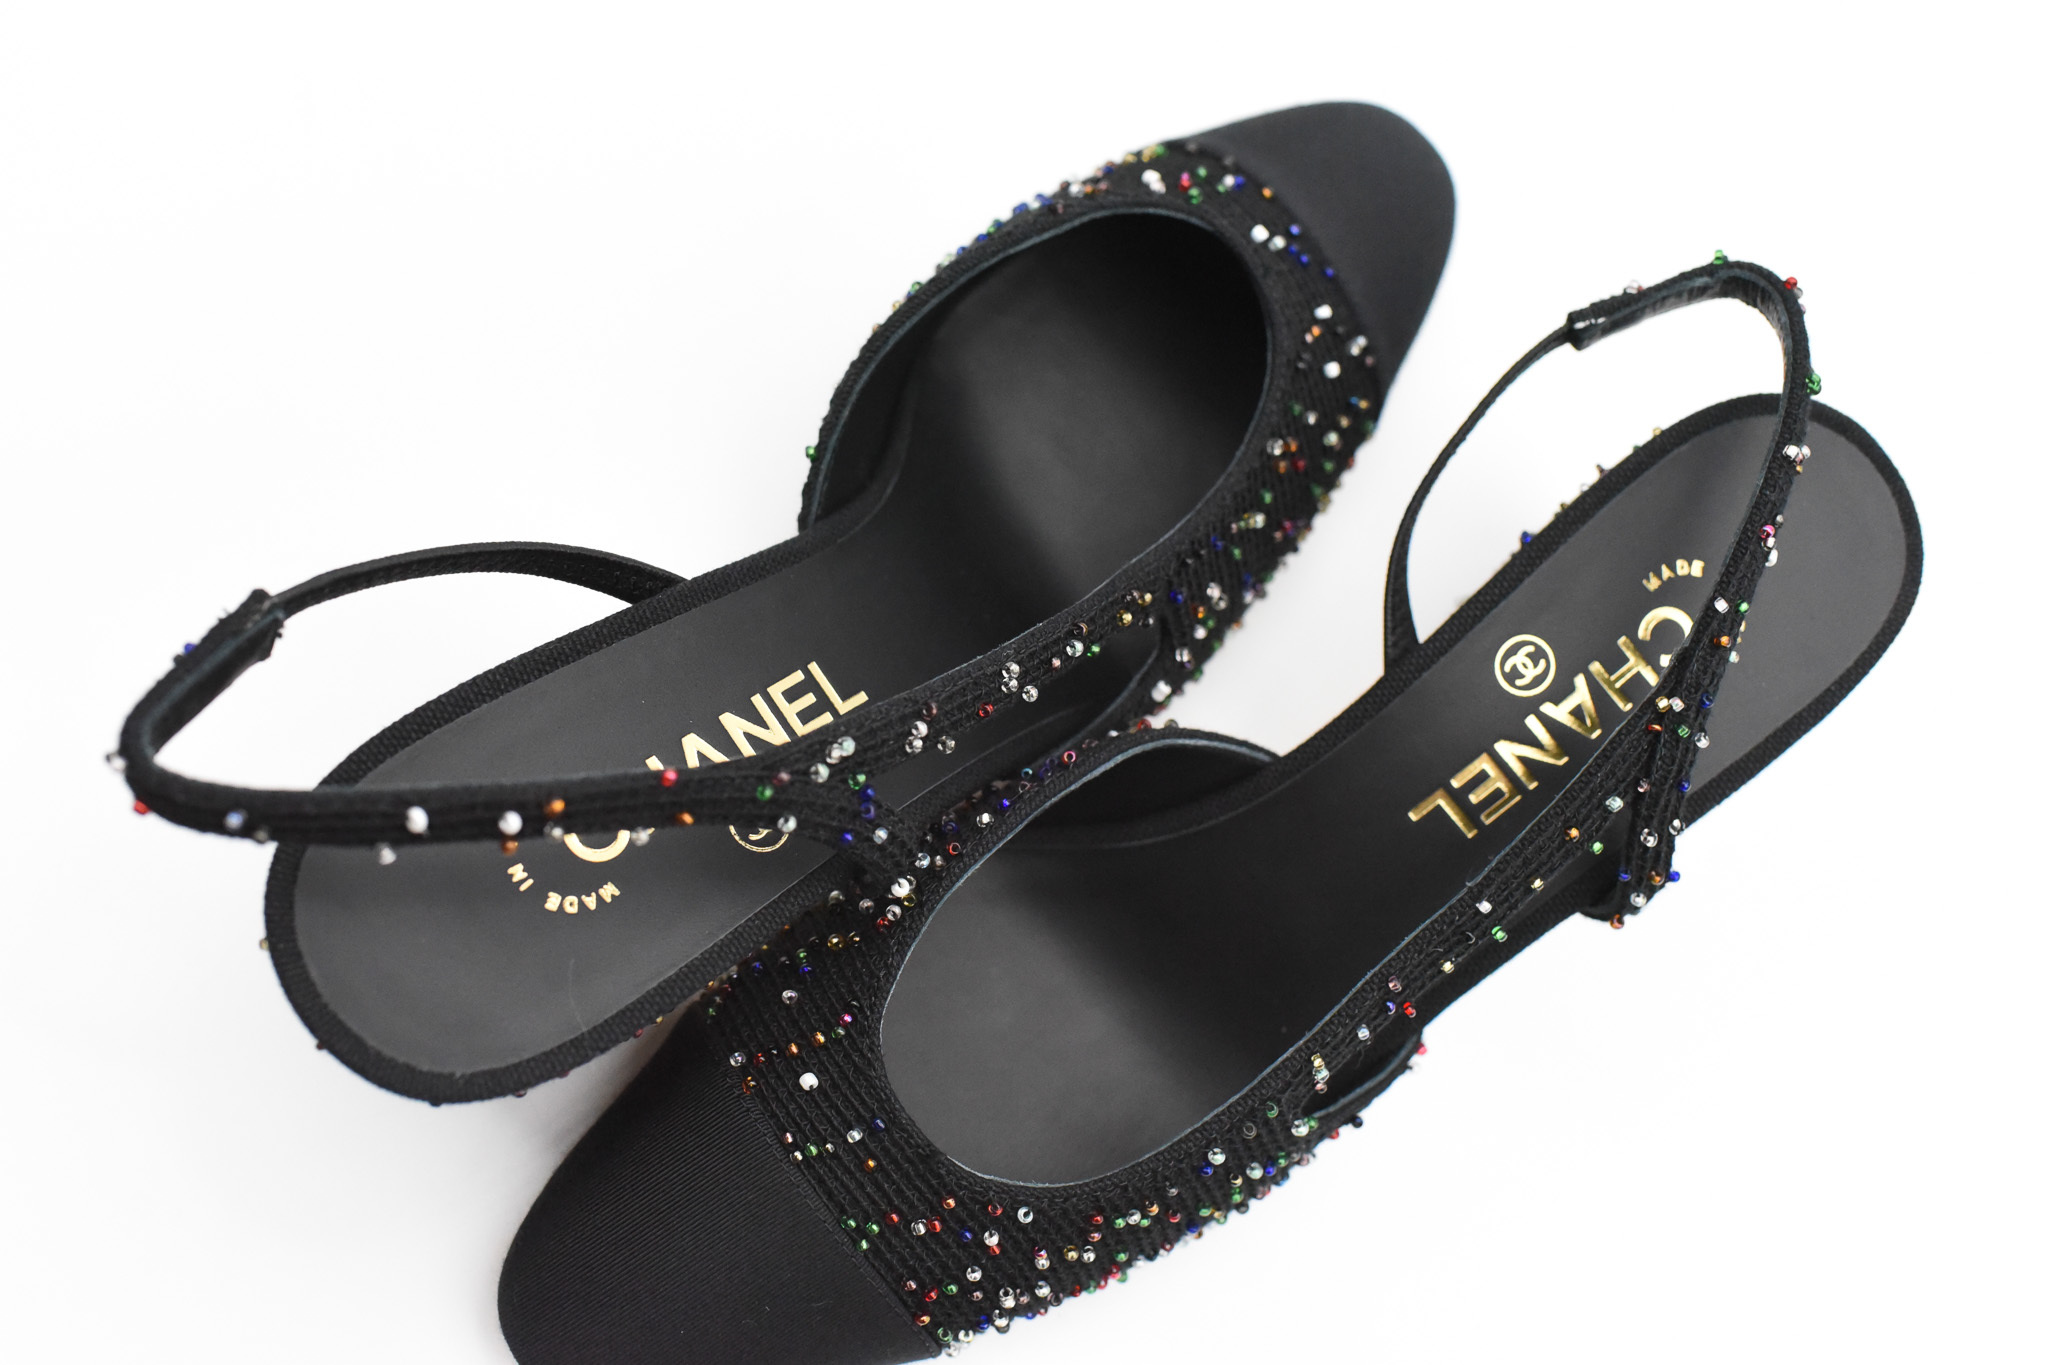 Chanel Slingback with Glitter, Size 36.5, New in Box GA001